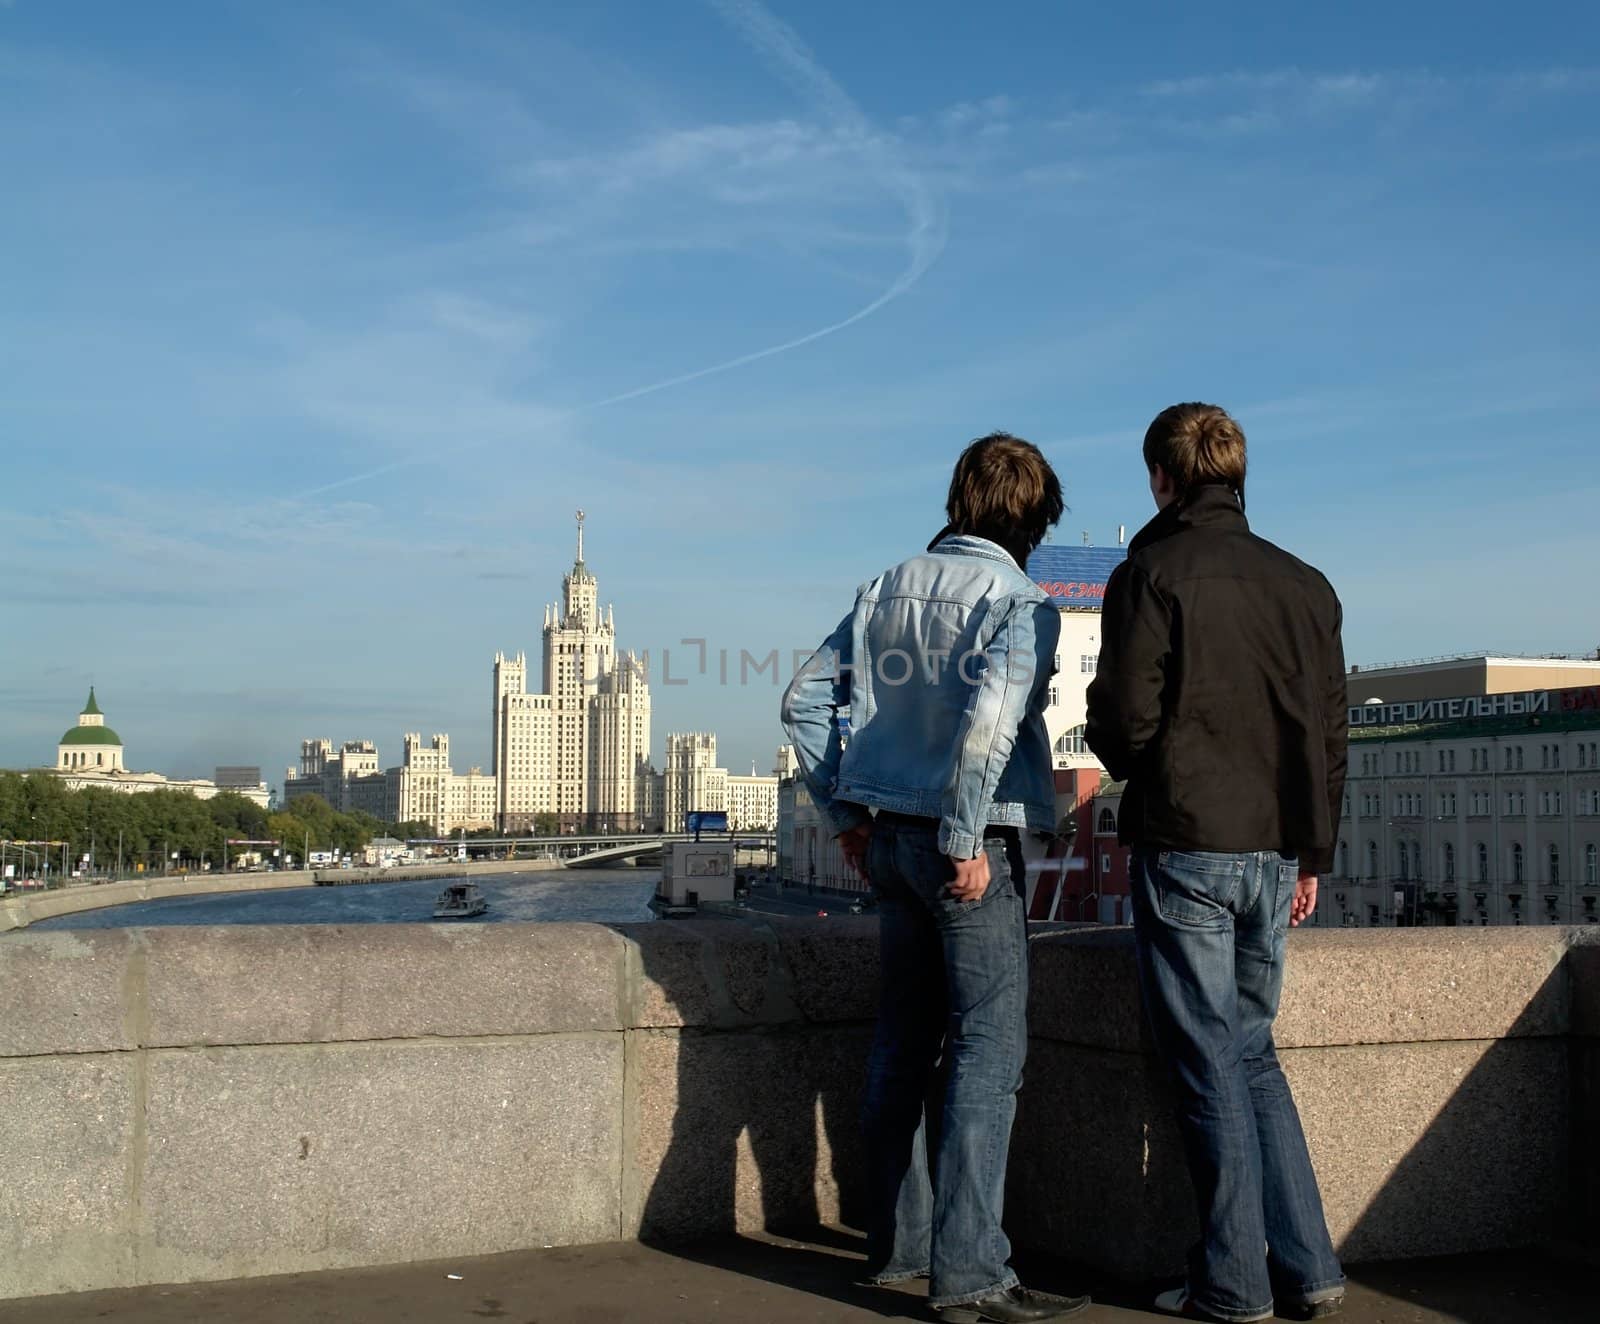 Two boys from the bridge view the Moscow sights